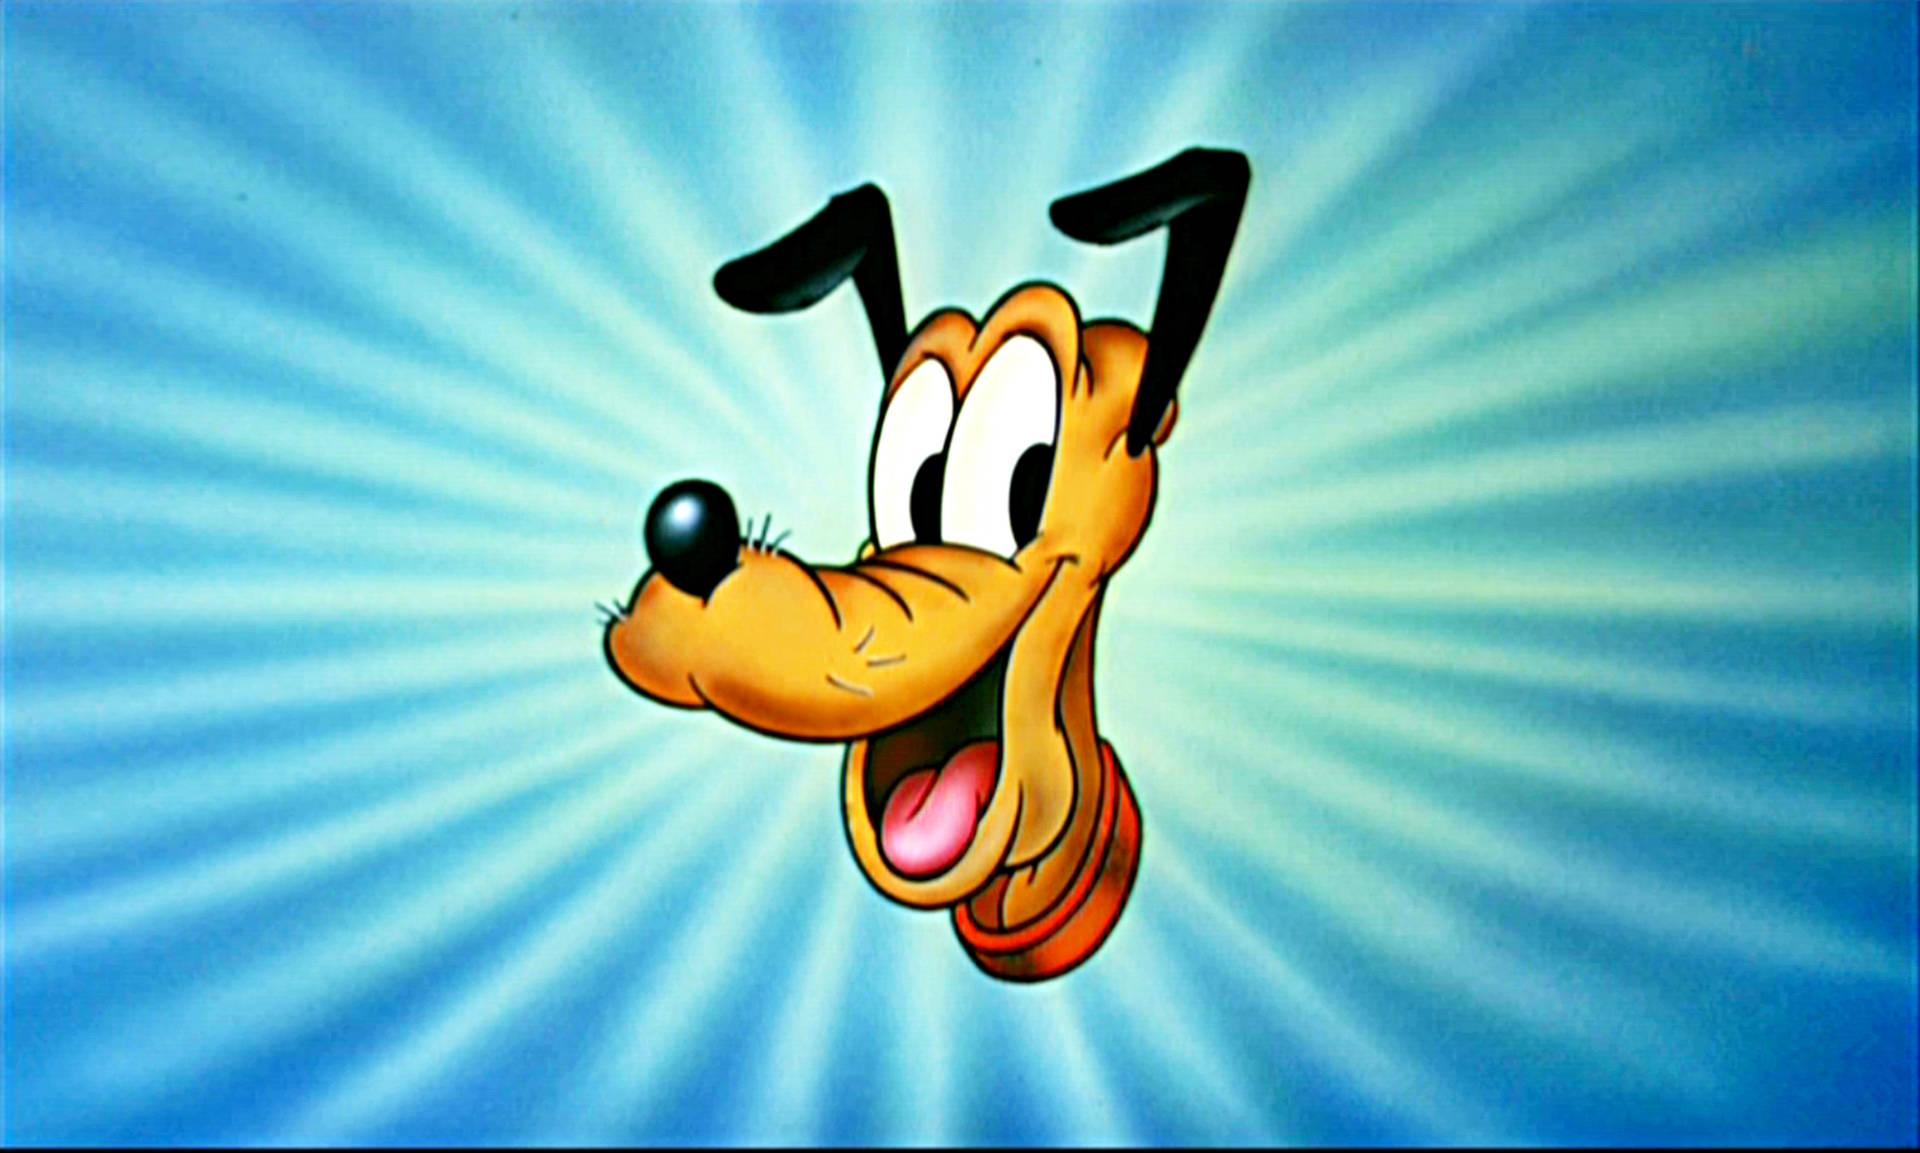 Close up image of Disney's Pluto with a playful charm. Wallpaper